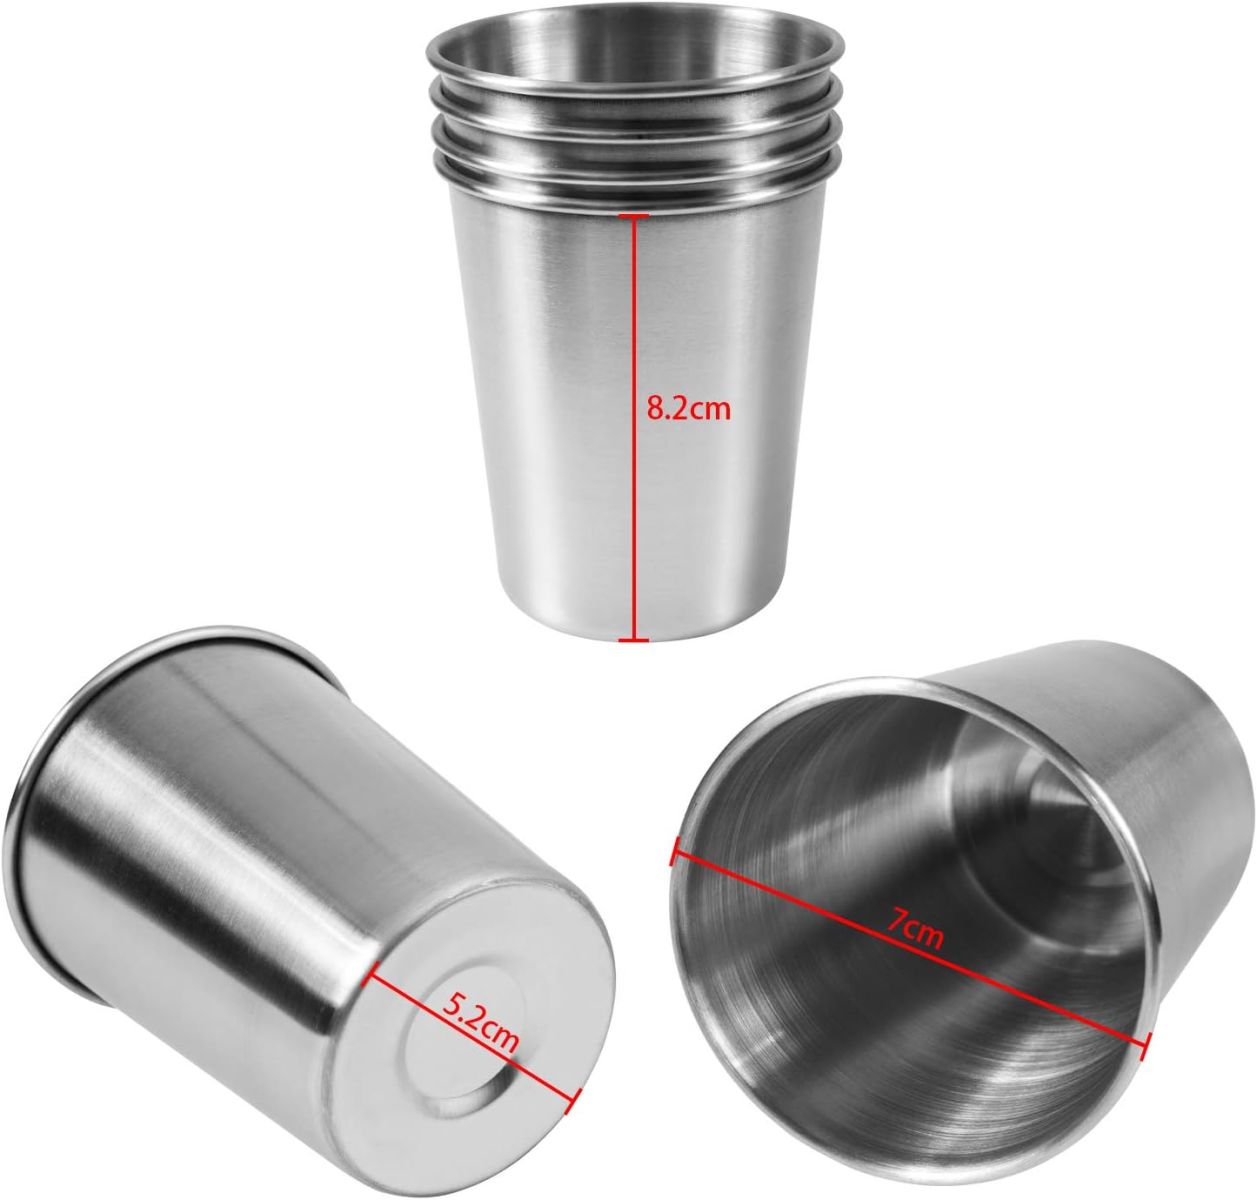 EVERMARKET 6 Pack 8 Ounce 230ml Stainless Steel Cups Shatterproof Pint Drinking Cups Metal Drinking Glasses for Kids and Adults